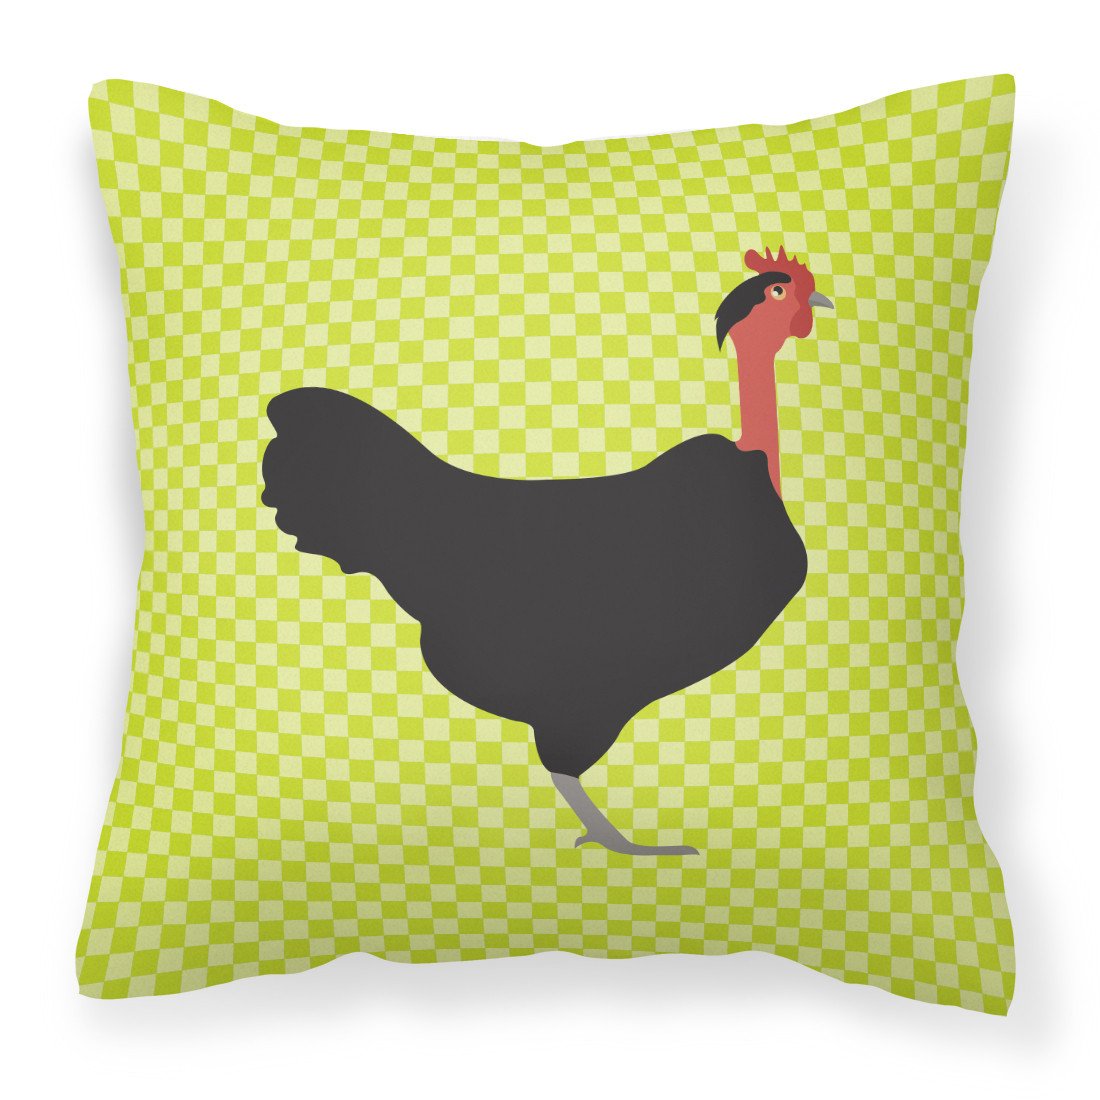 Naked Neck Chicken Green Fabric Decorative Pillow BB7665PW1818 by Caroline's Treasures